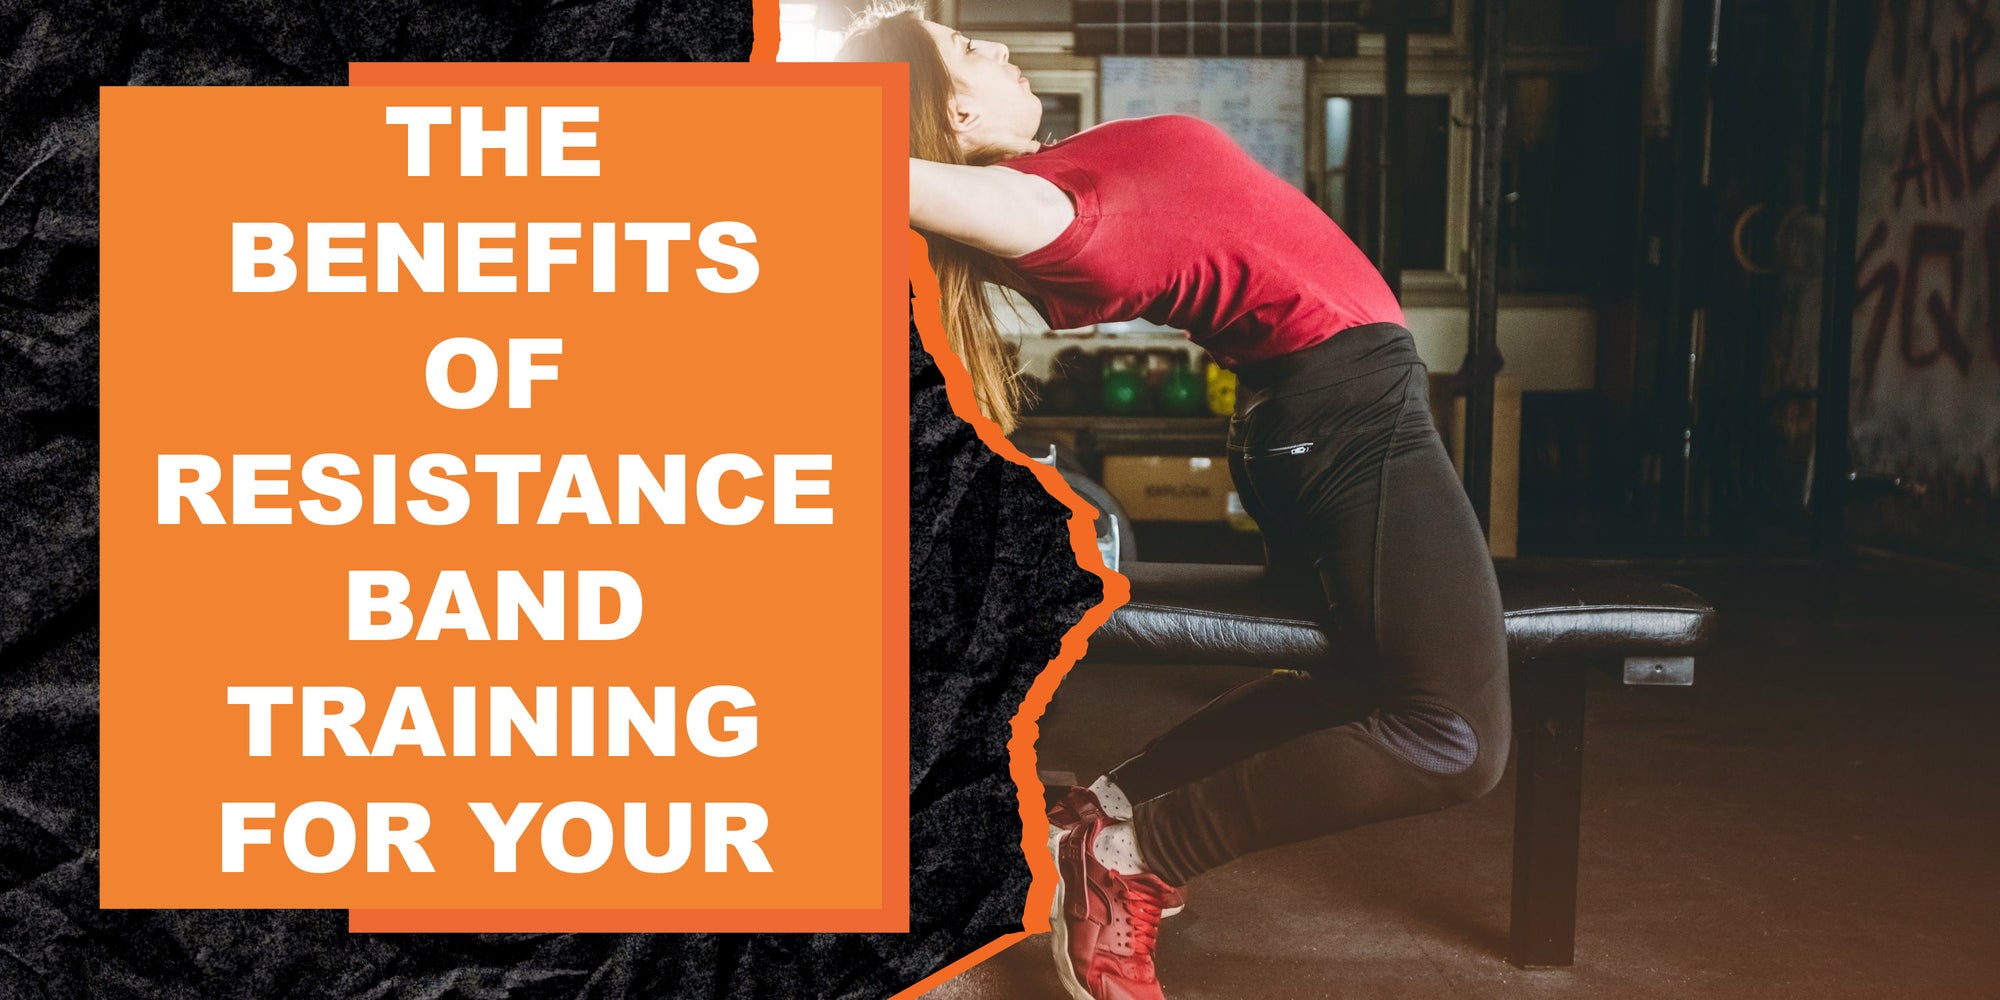 The Benefits of Resistance Band Training for Your Core